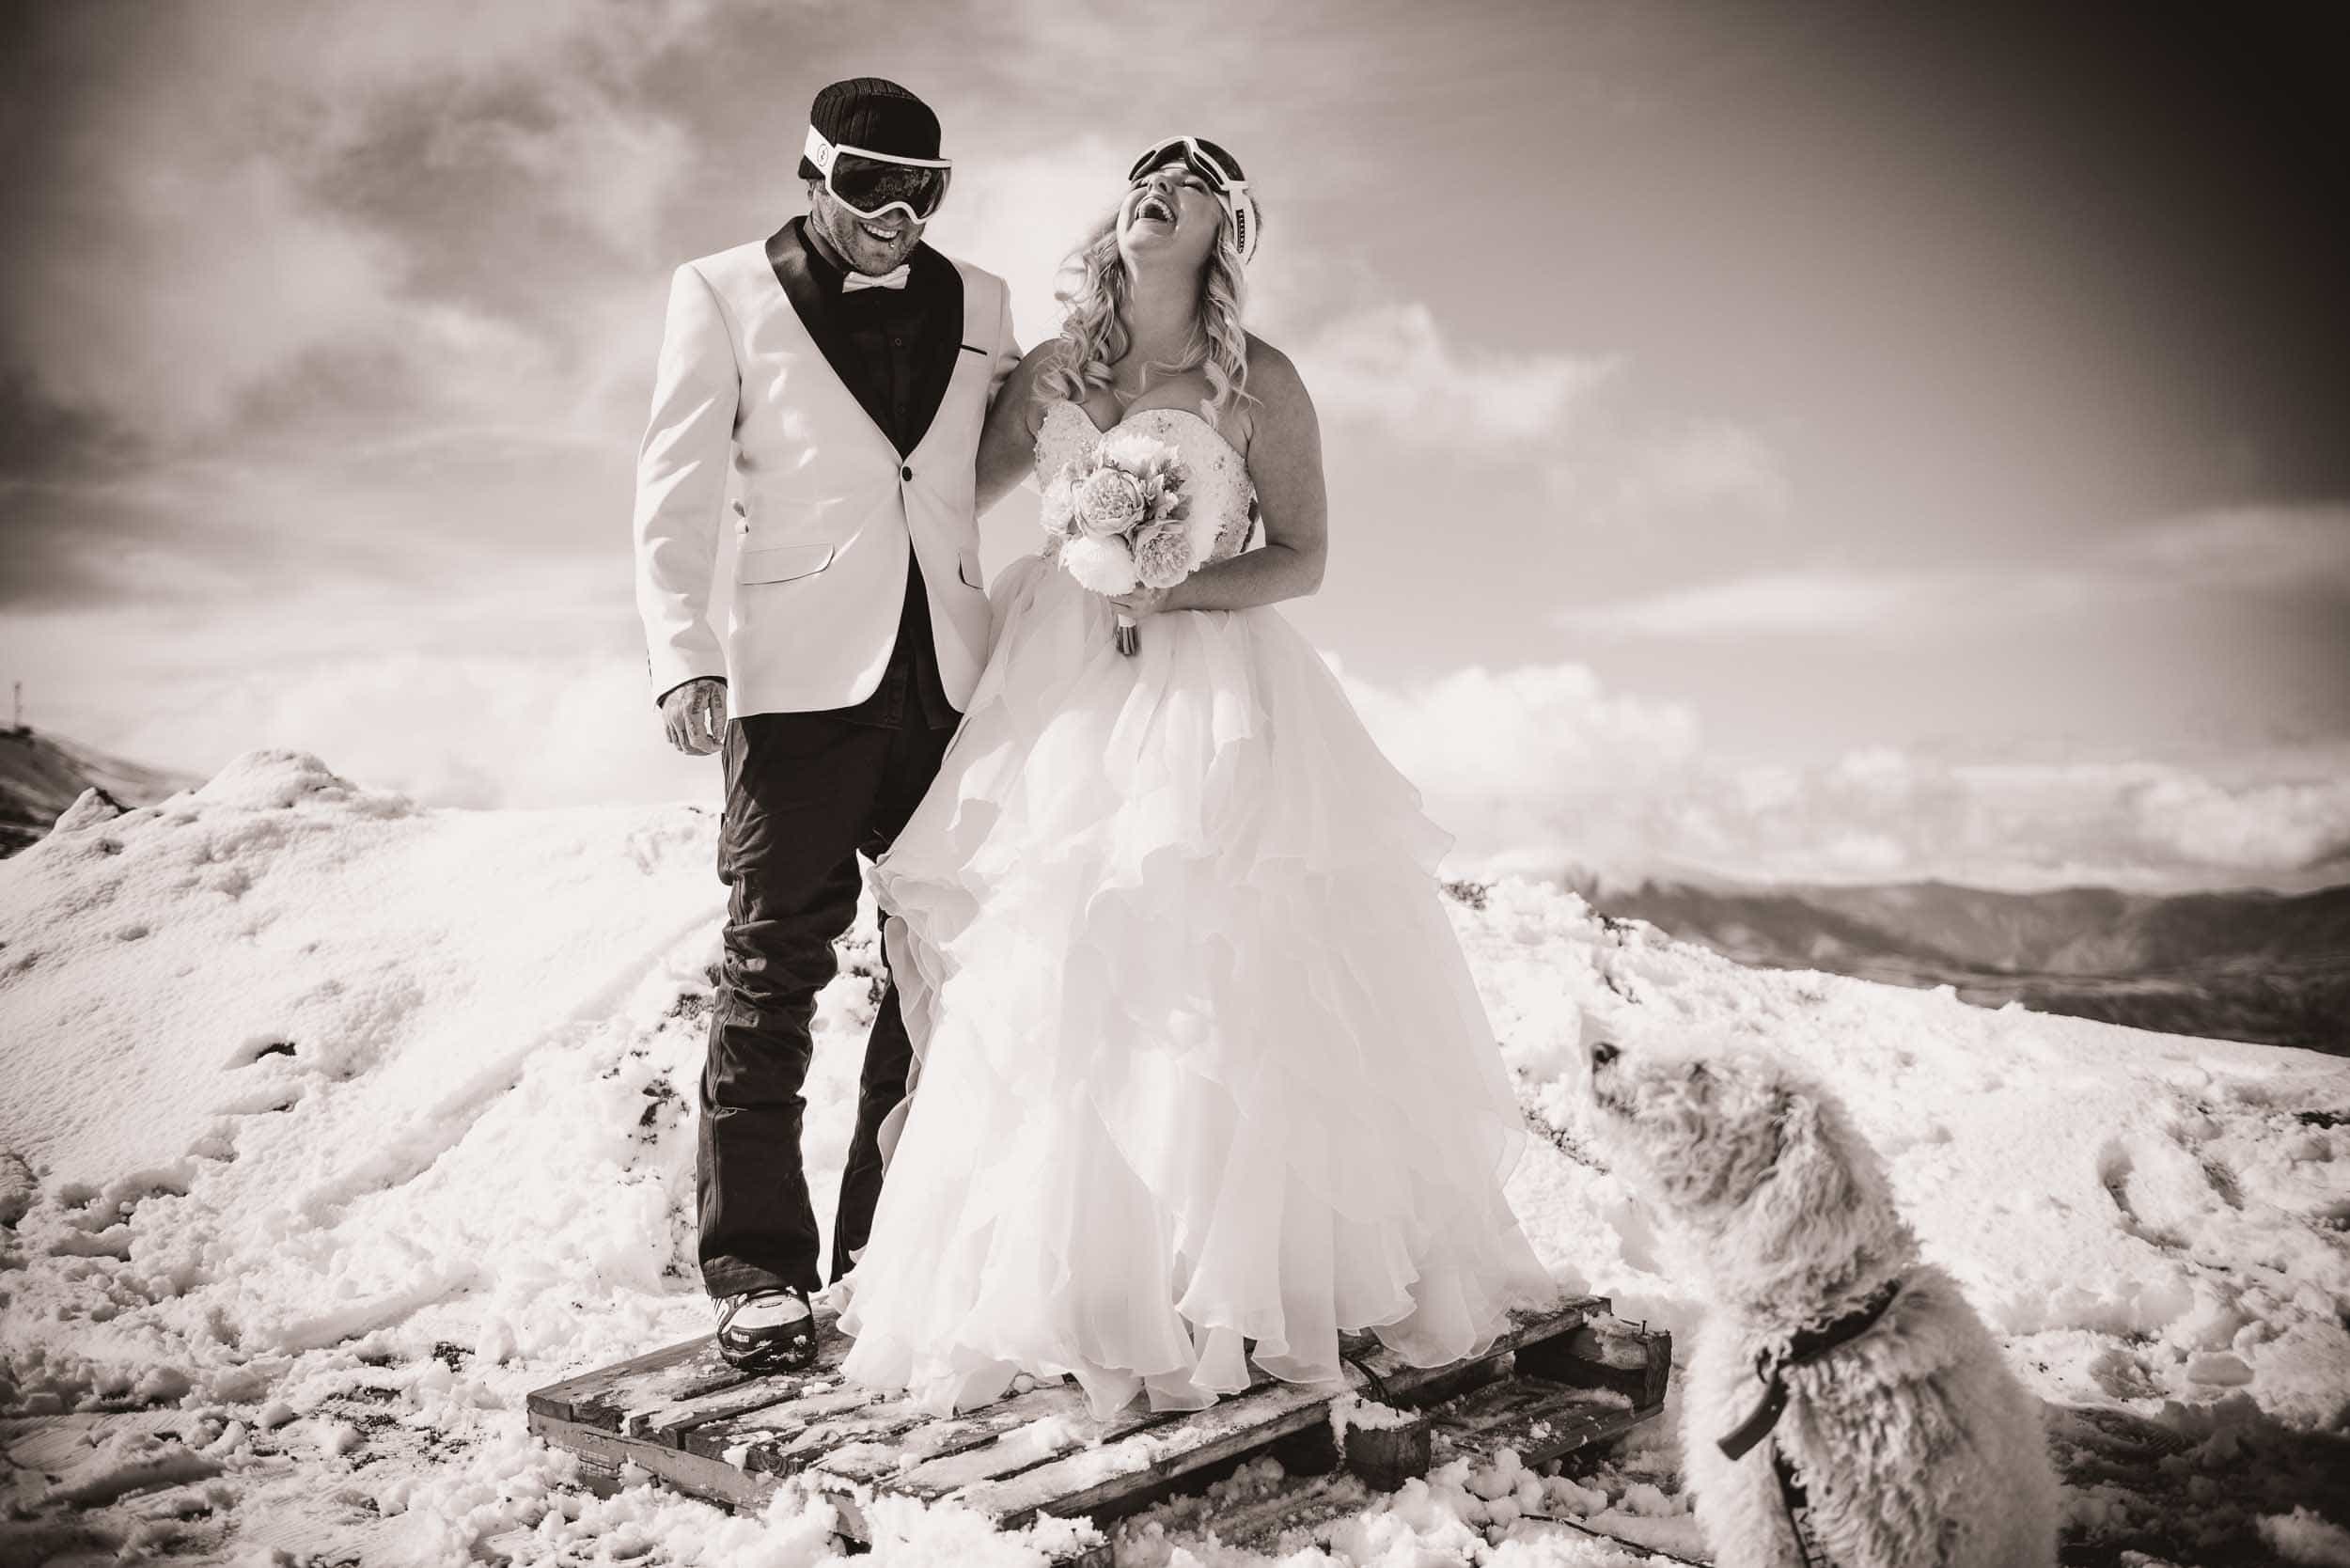 blog post featured image 7 queenstown wedding trends Now this is what I call a Queenstown Winter Wedding!! At Coronet Peak...on snowboards...in a snow storm!! fallon photography